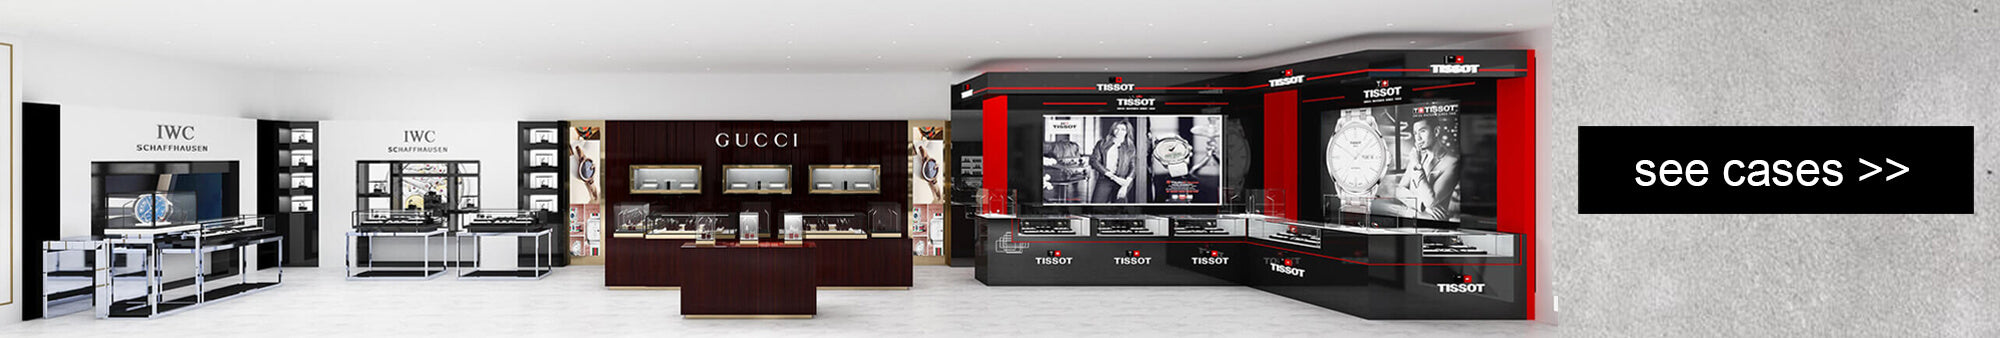 Check the renderings of TISSOT watch display showcase >>>